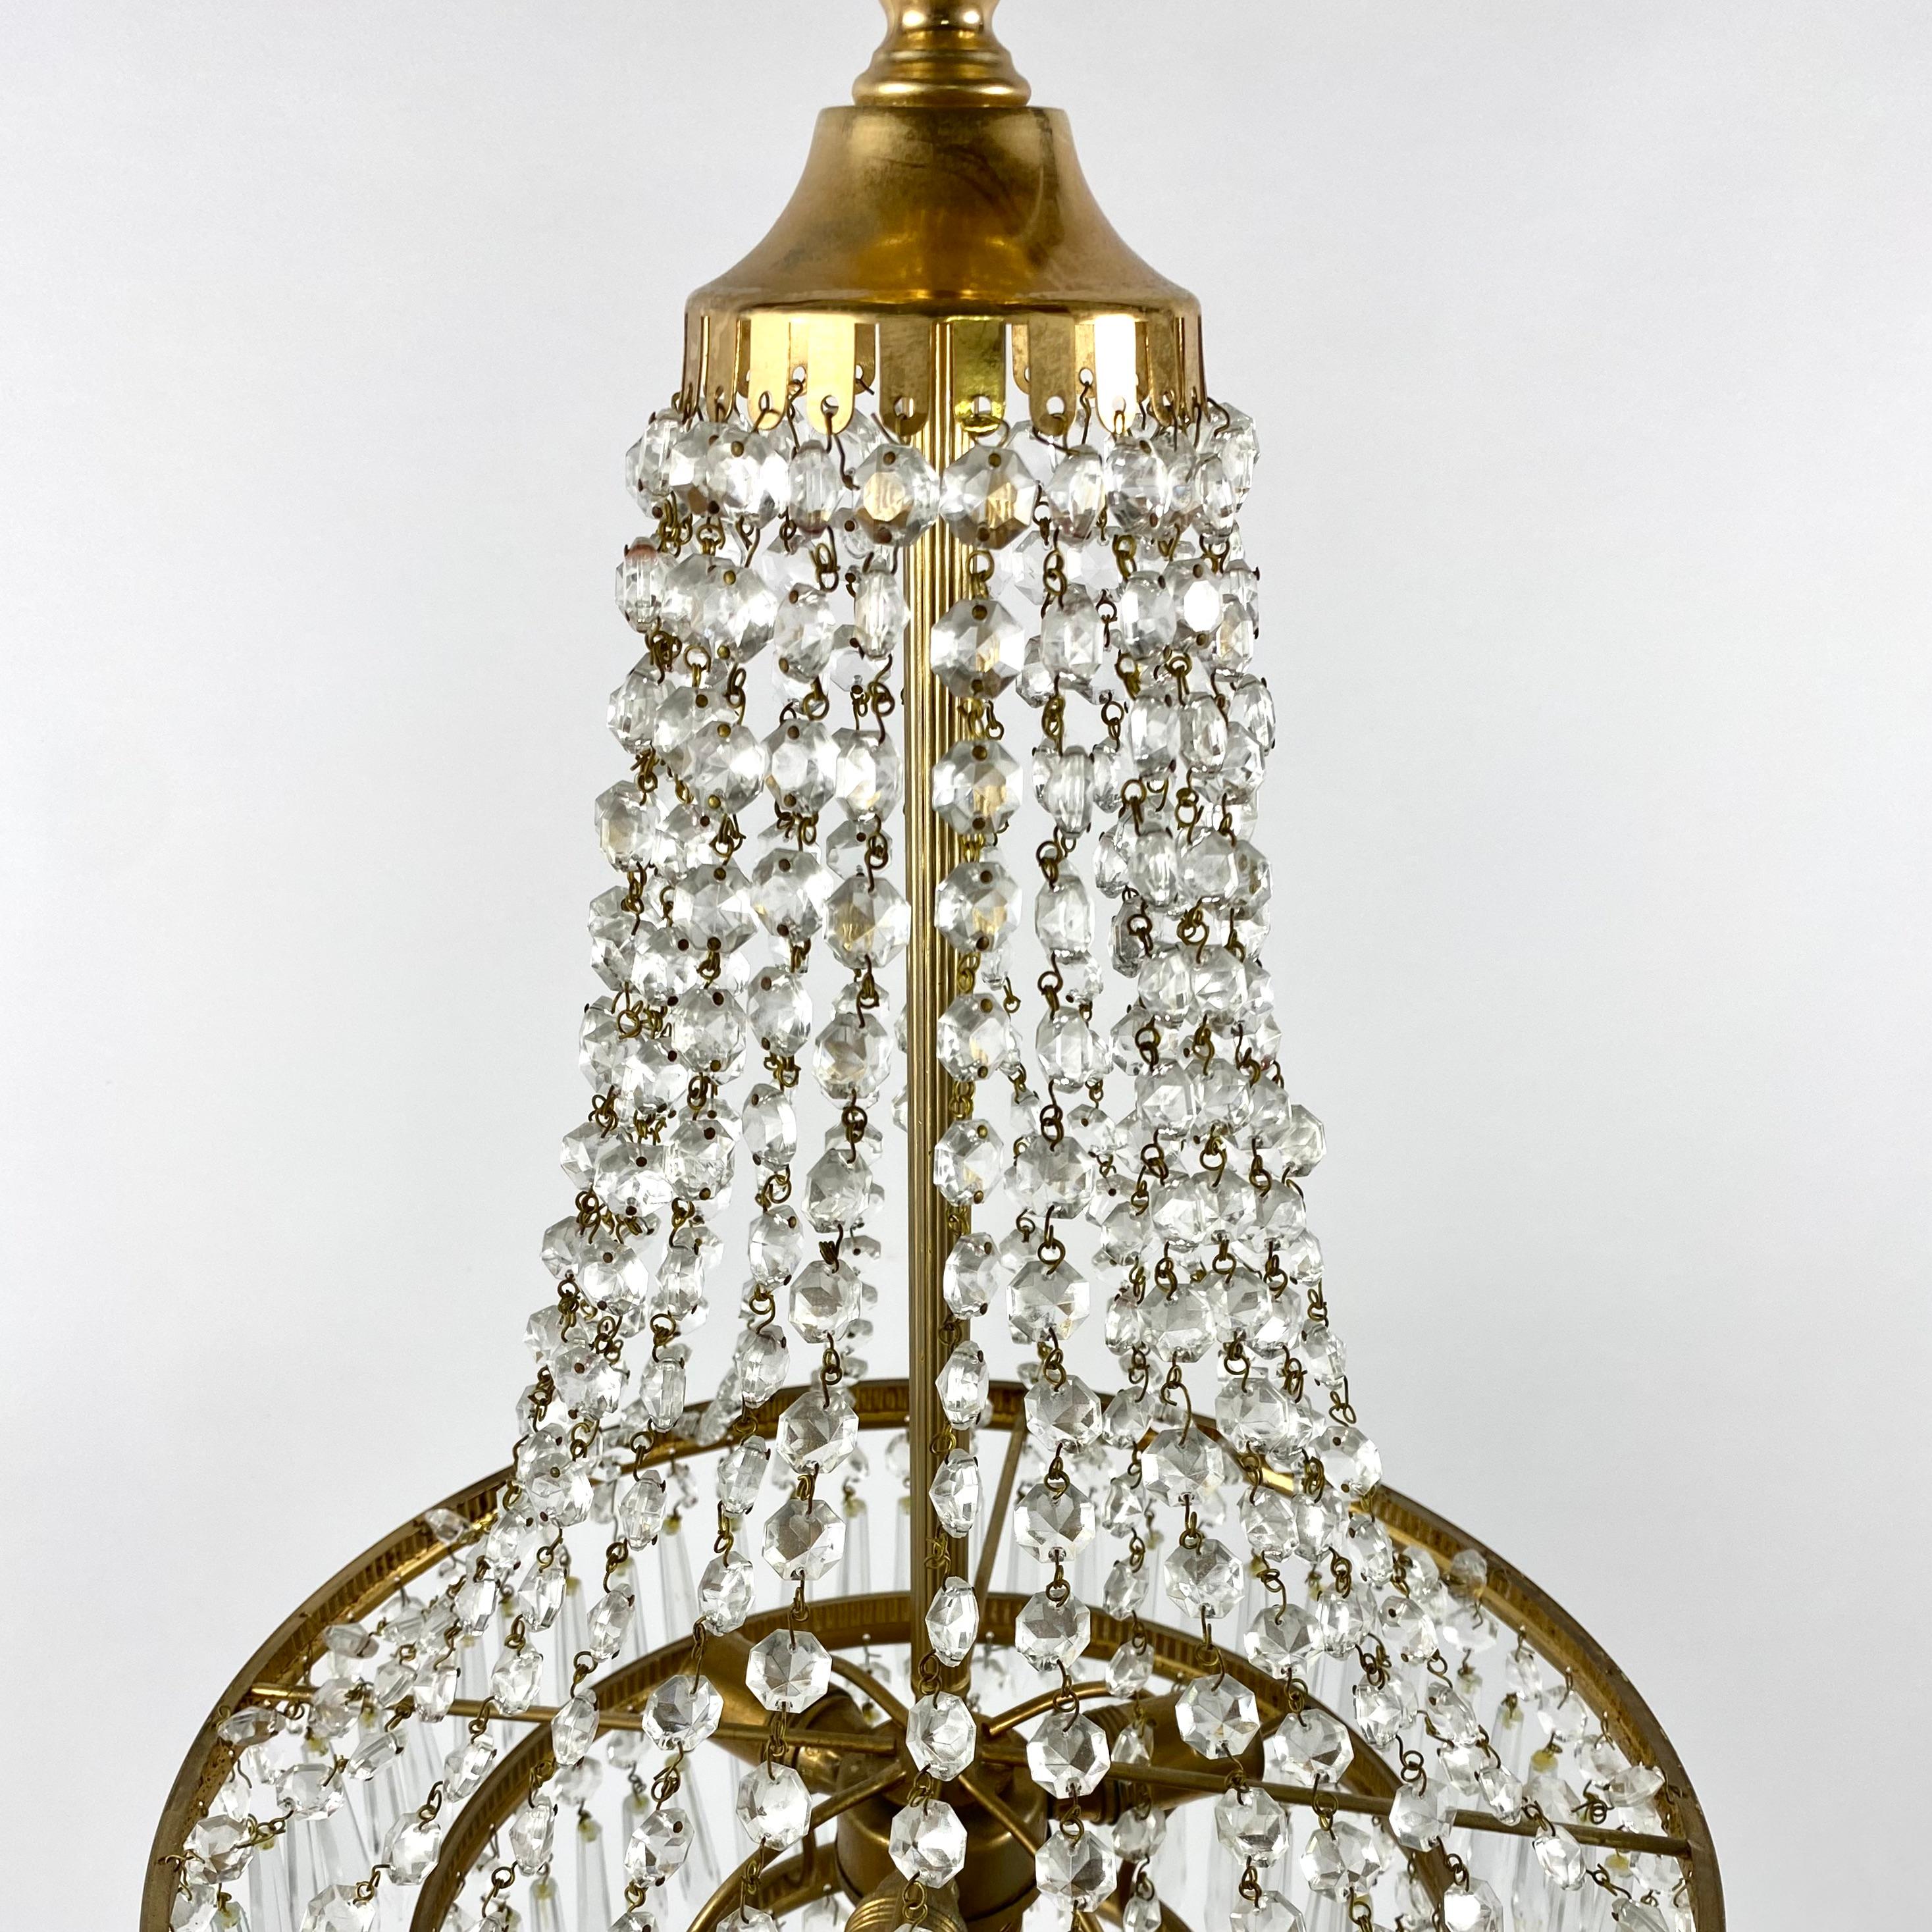 Late 20th Century Chandelier Vintage Crystal Brass Pendant Lighting With 3 Light Points, France For Sale